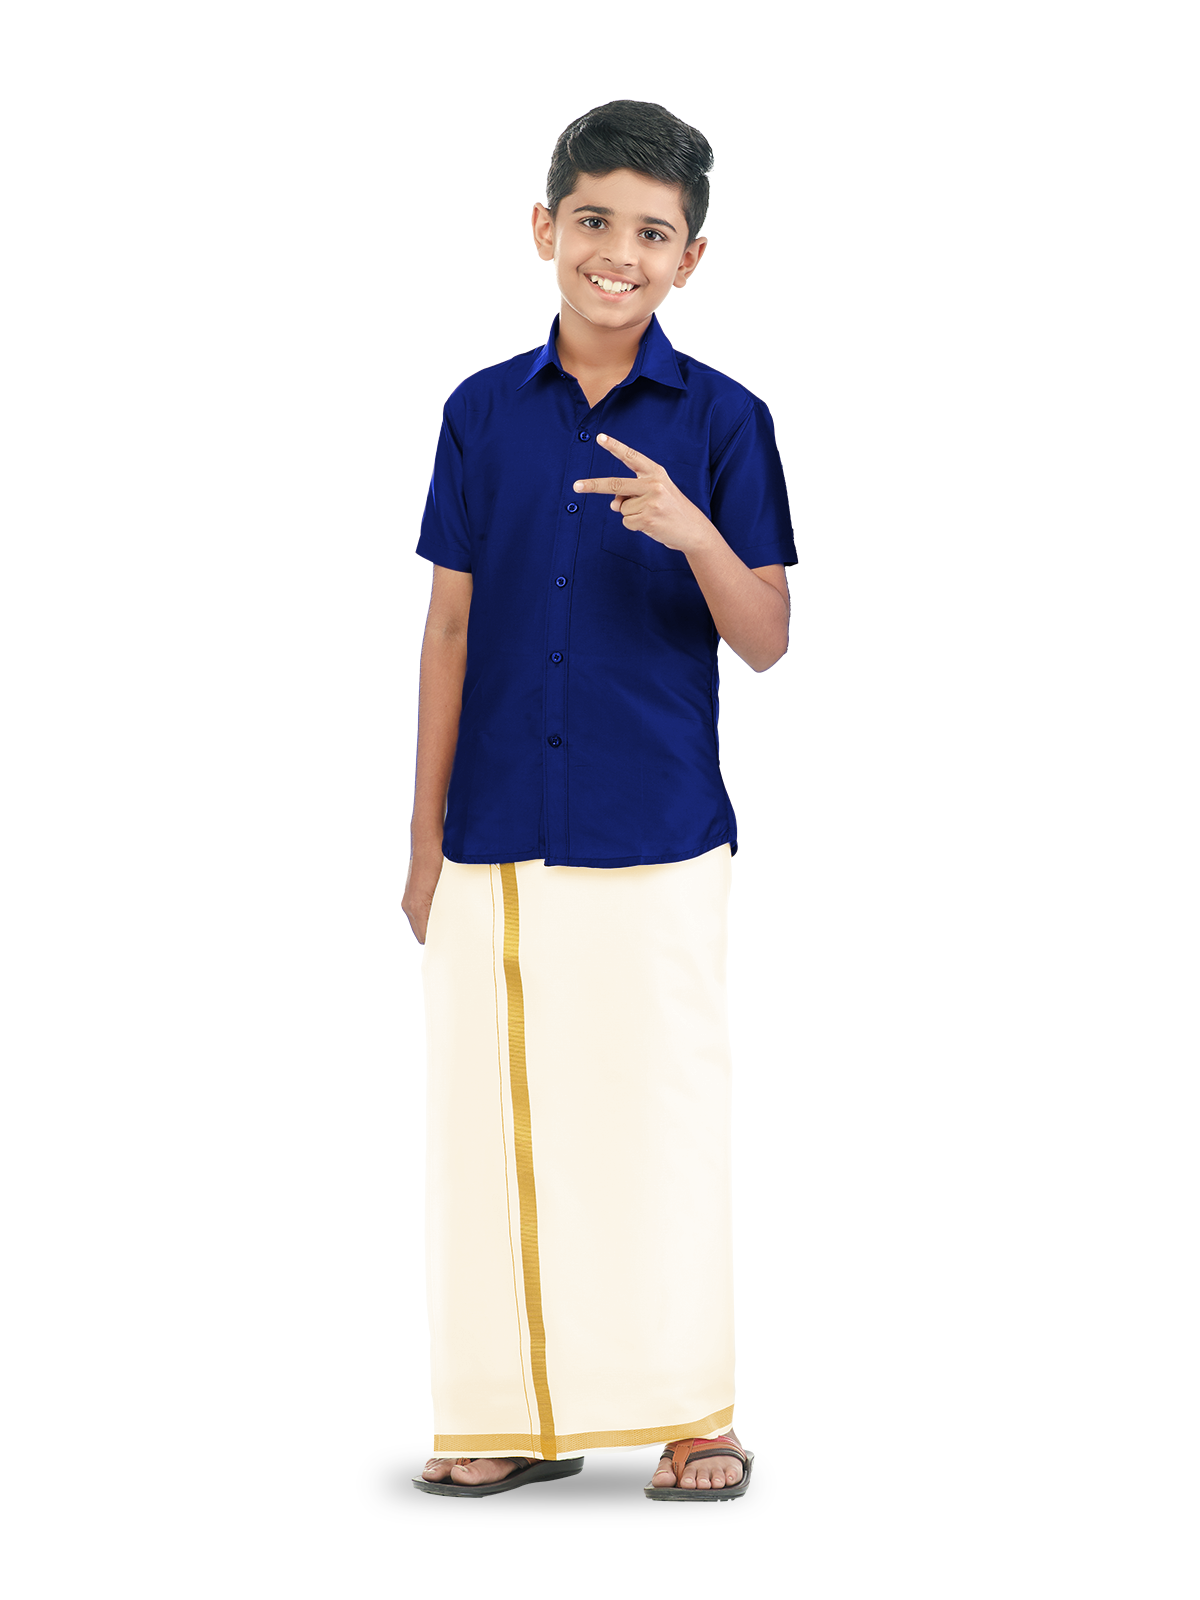 Shirt and Dhoti for Kids, Innerwear for Kids